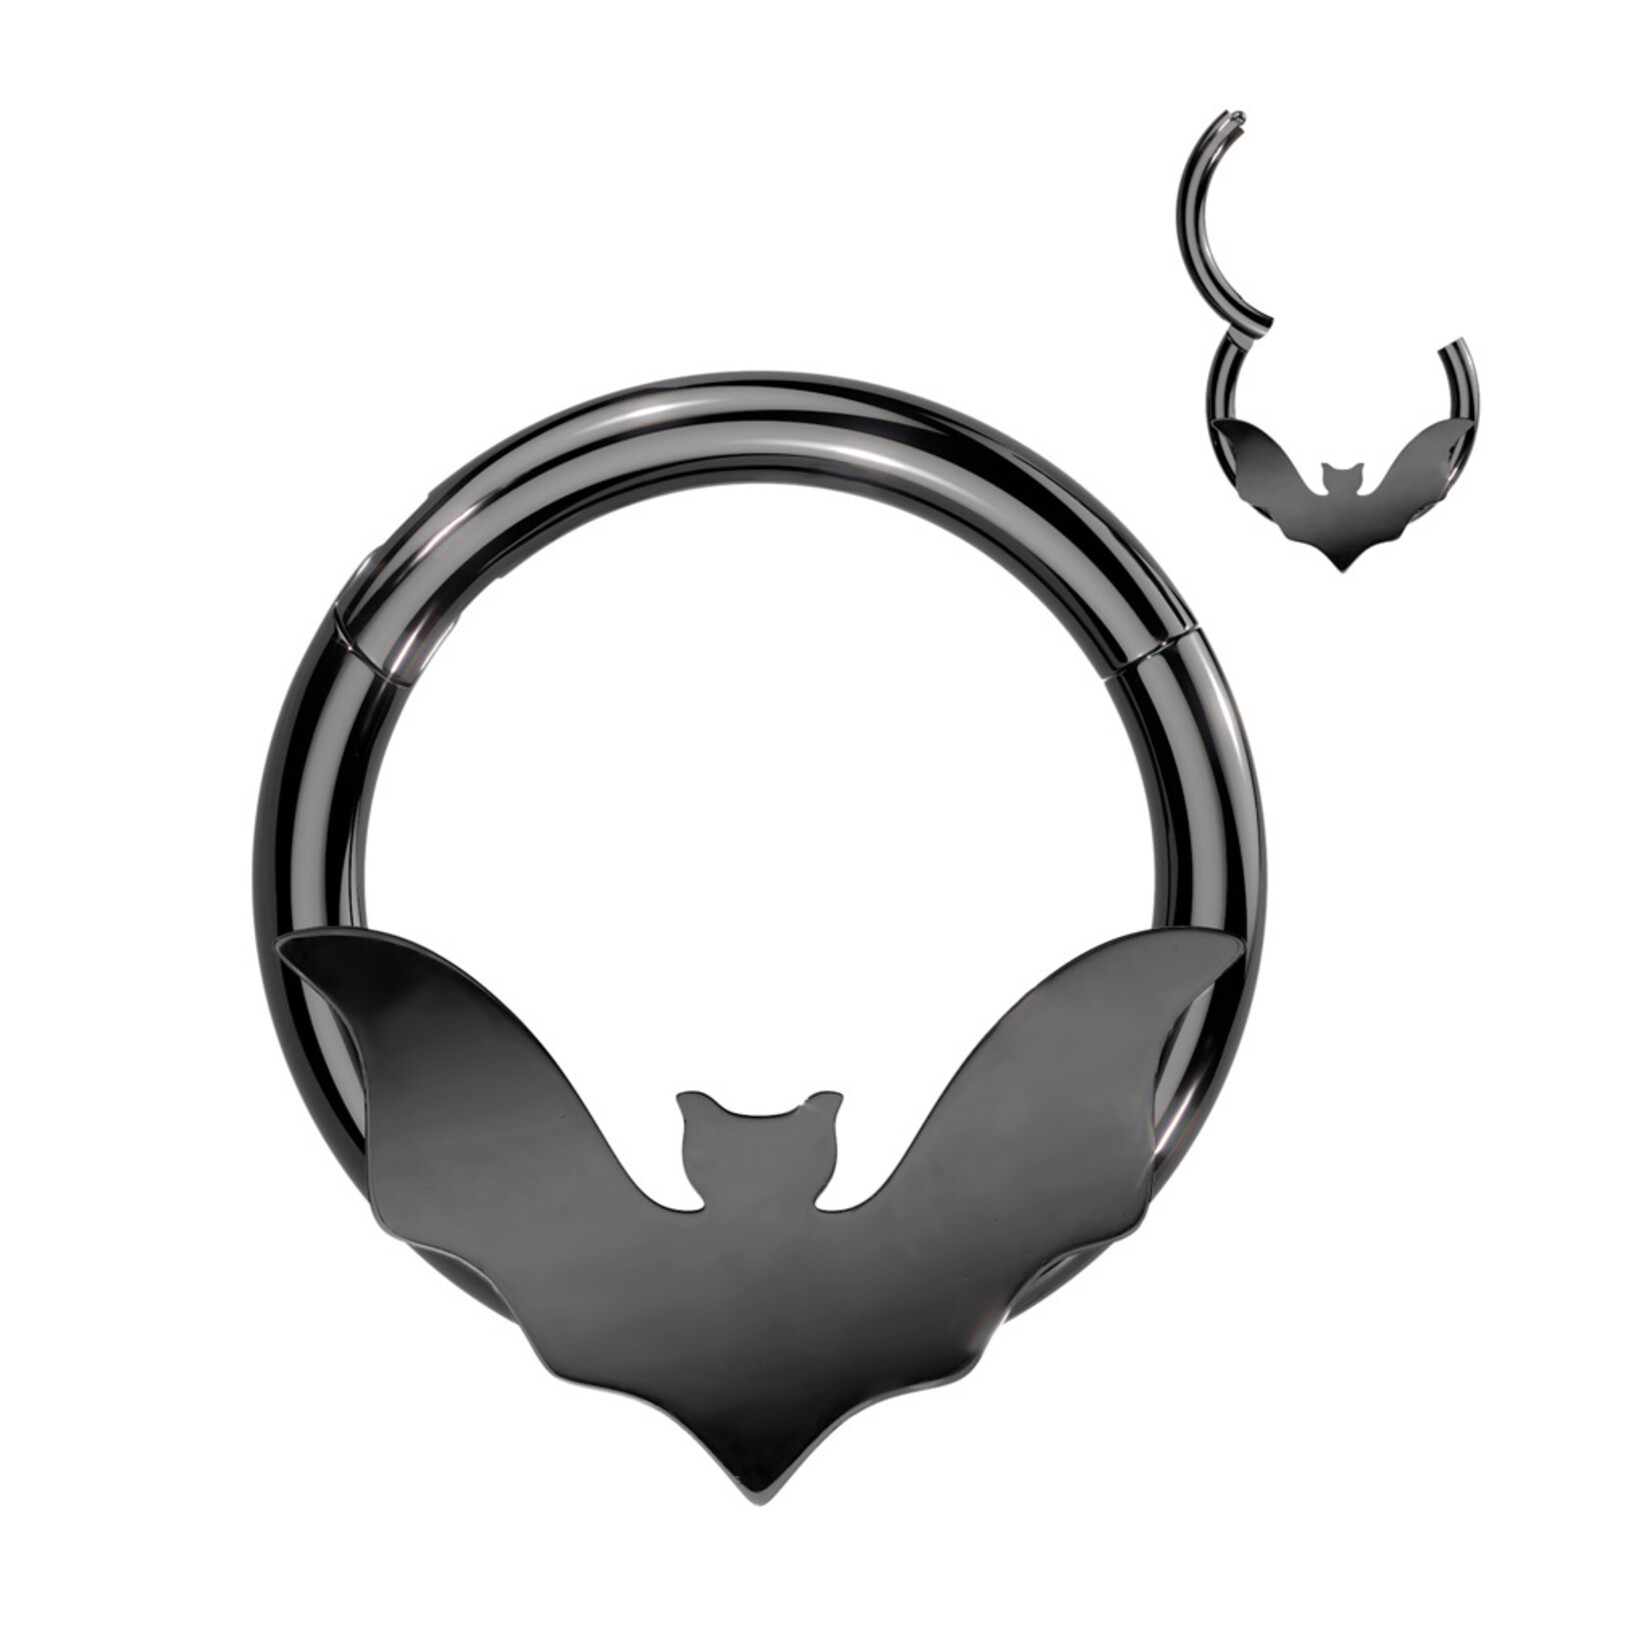 Hollywood Body Jewelry Surgical Steel Hinged Bat Ring